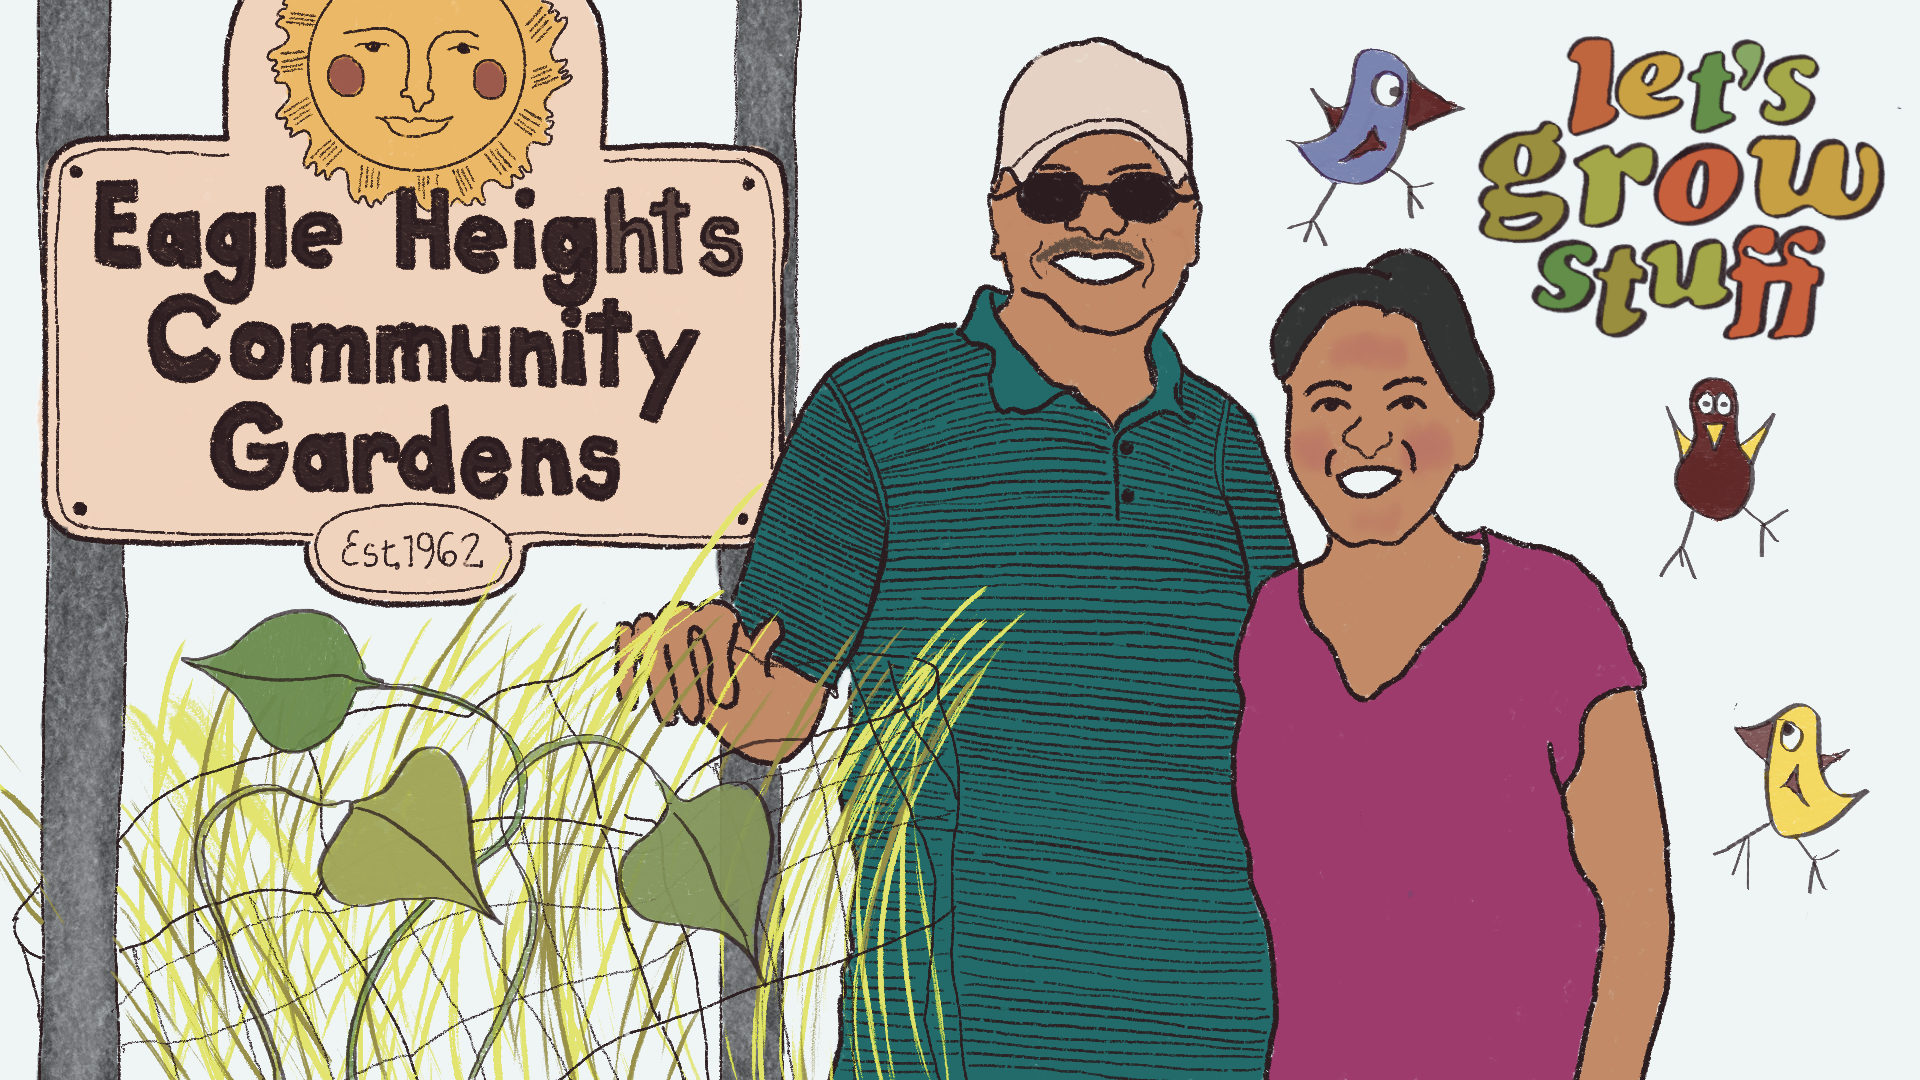 An illustration of Lata and Tilak Chandra standing next to each other in front of a sign that reads "Eagle Heights Community Gardens. Three birds fly around them.